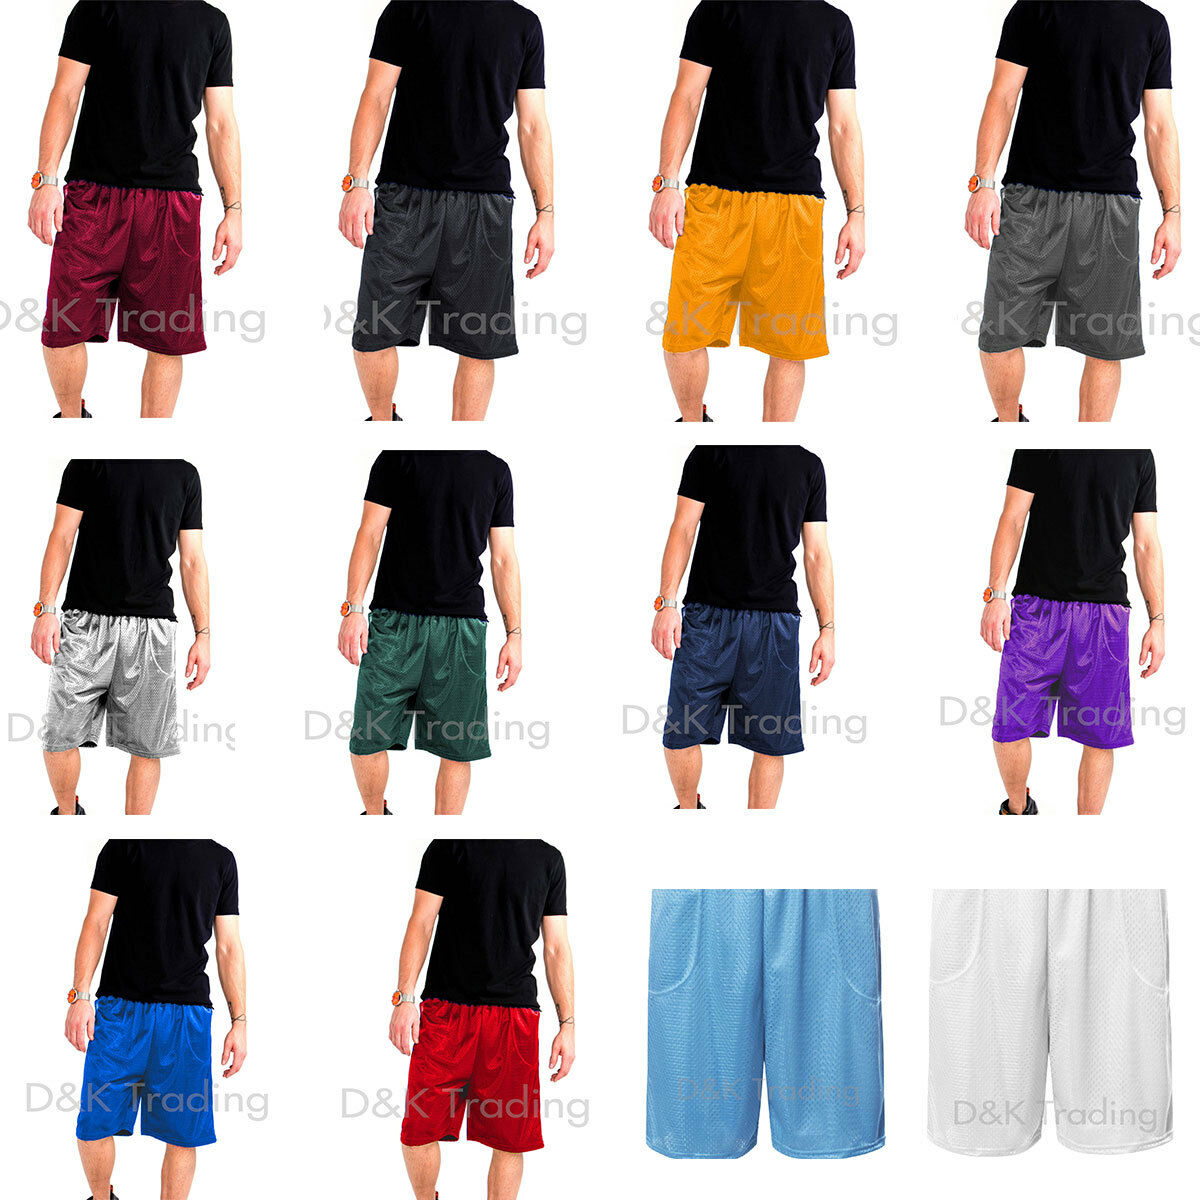 Men's Mesh Jersey Athletic Fitness Workout Colors Shorts 2 Pockets Size S~5xl